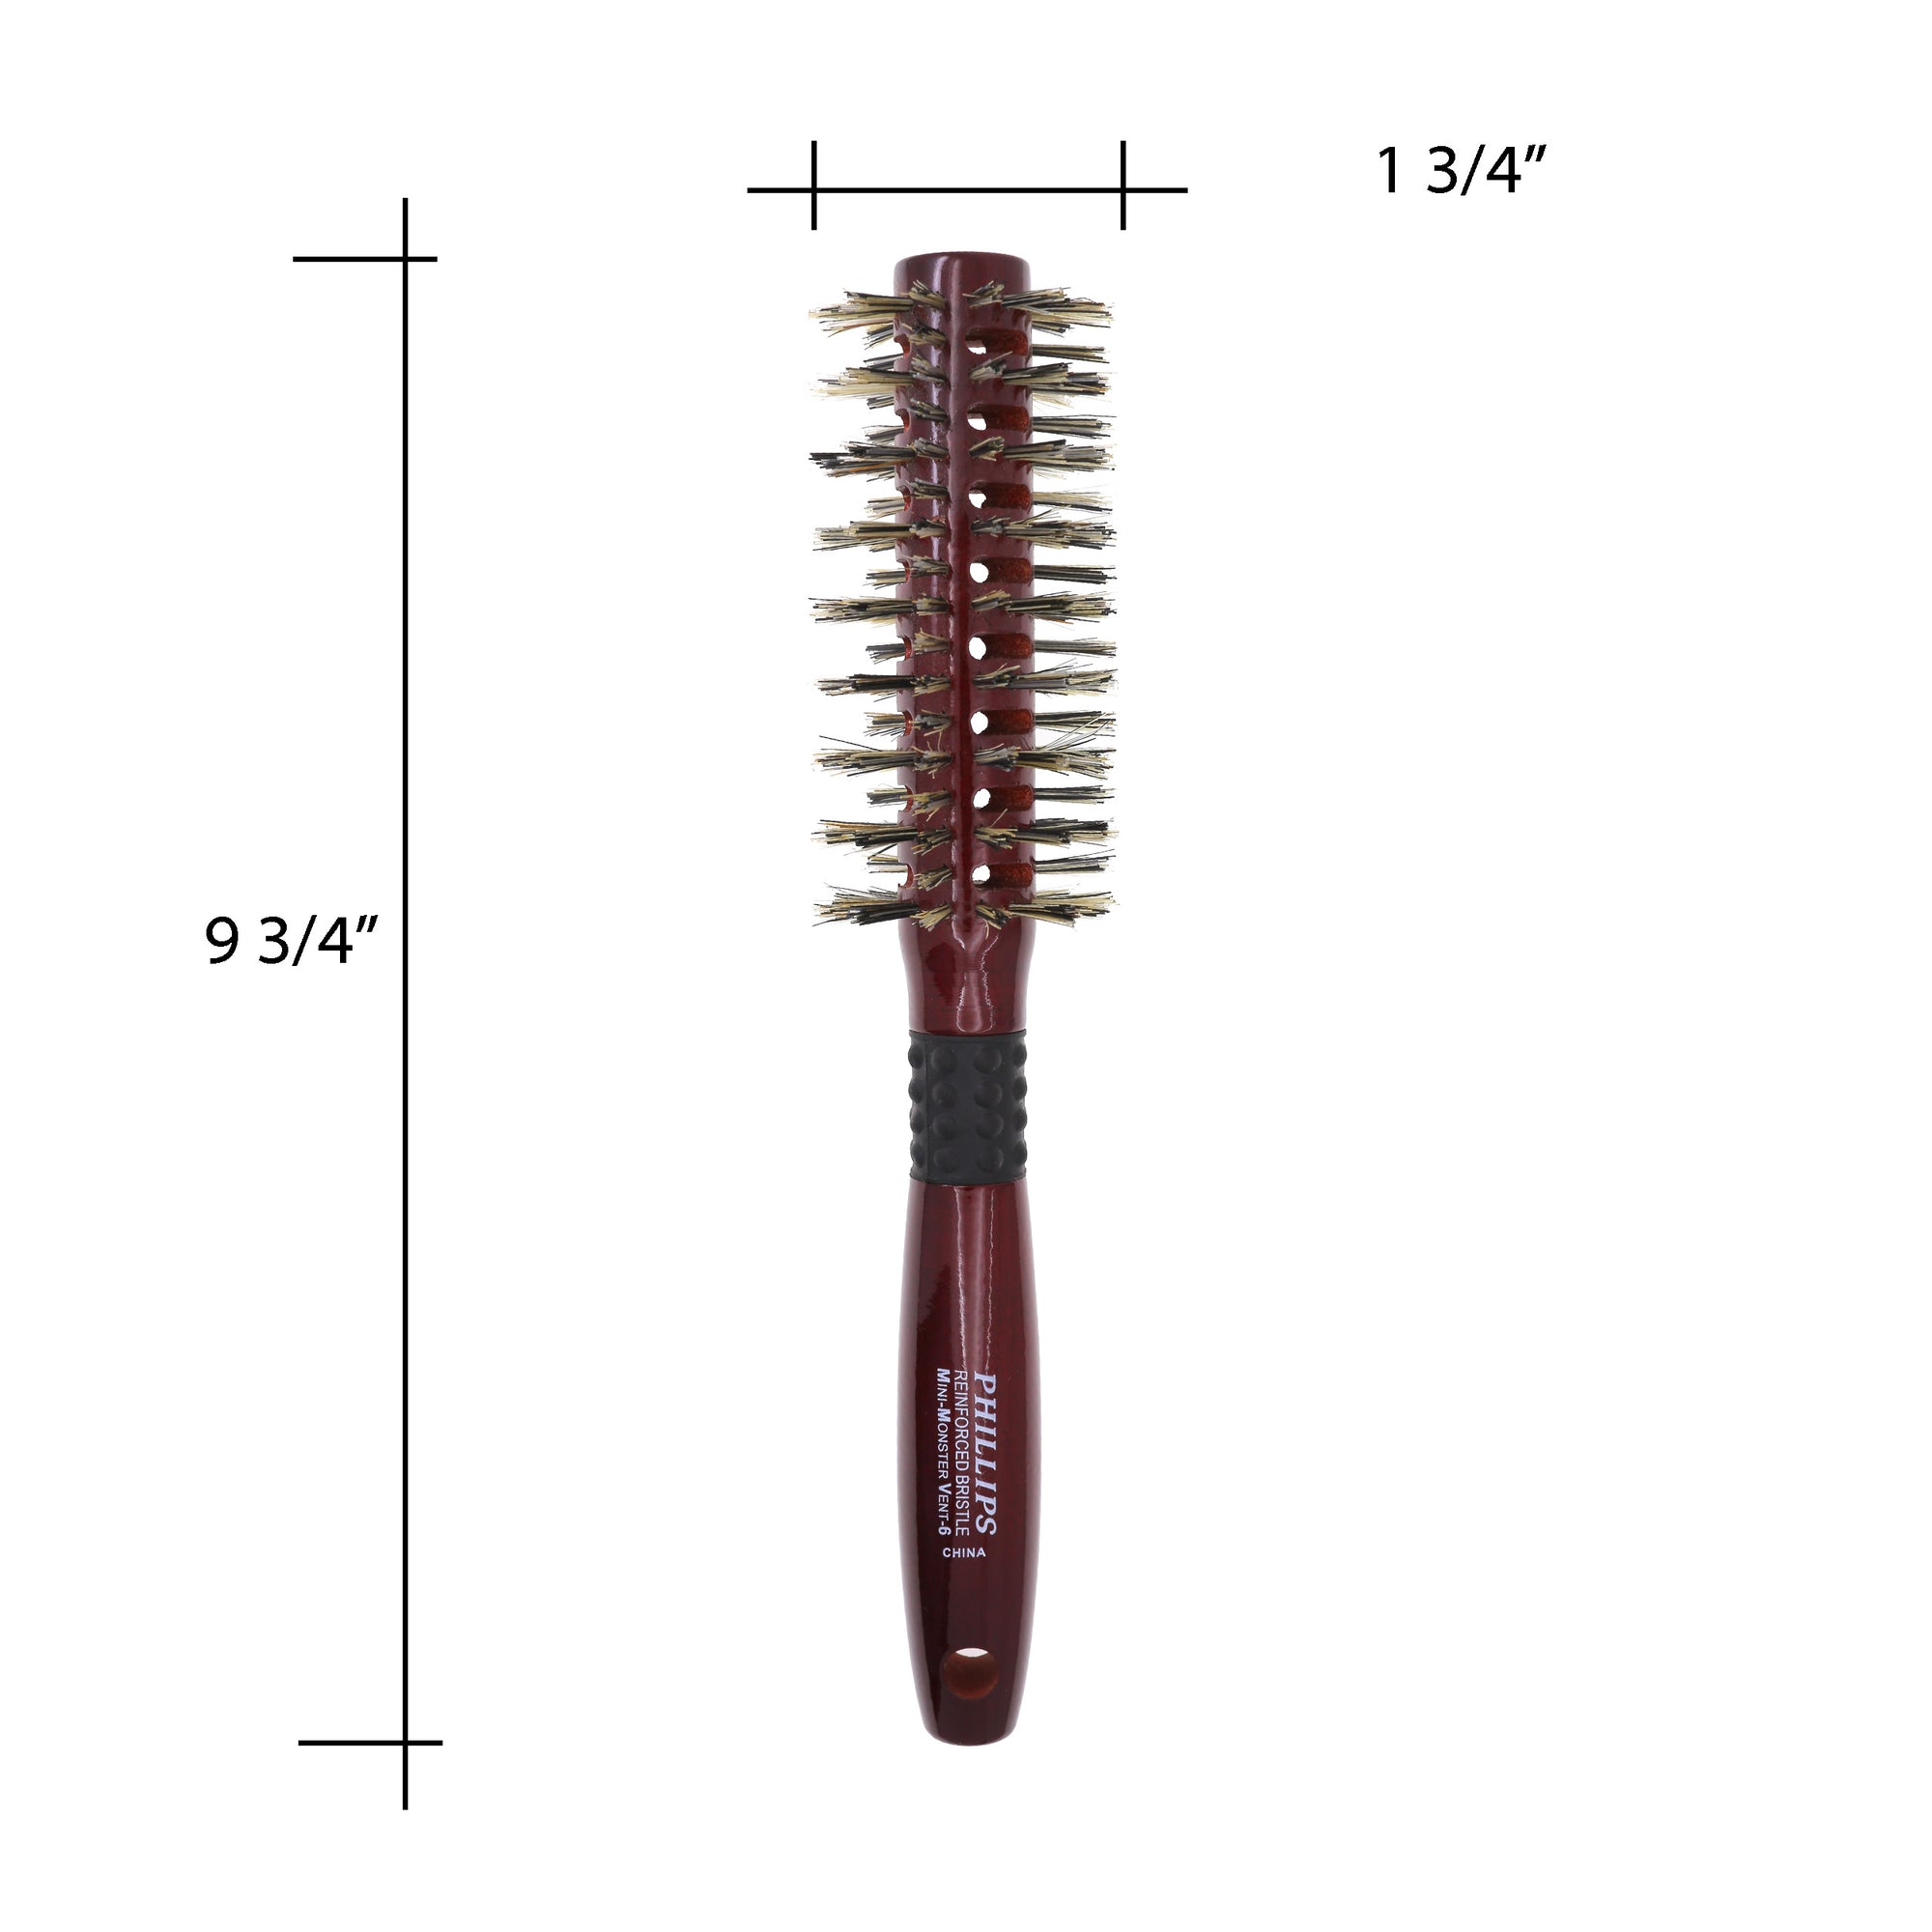 2" Natural Bristle Round Hair Brush with Rubber Grip